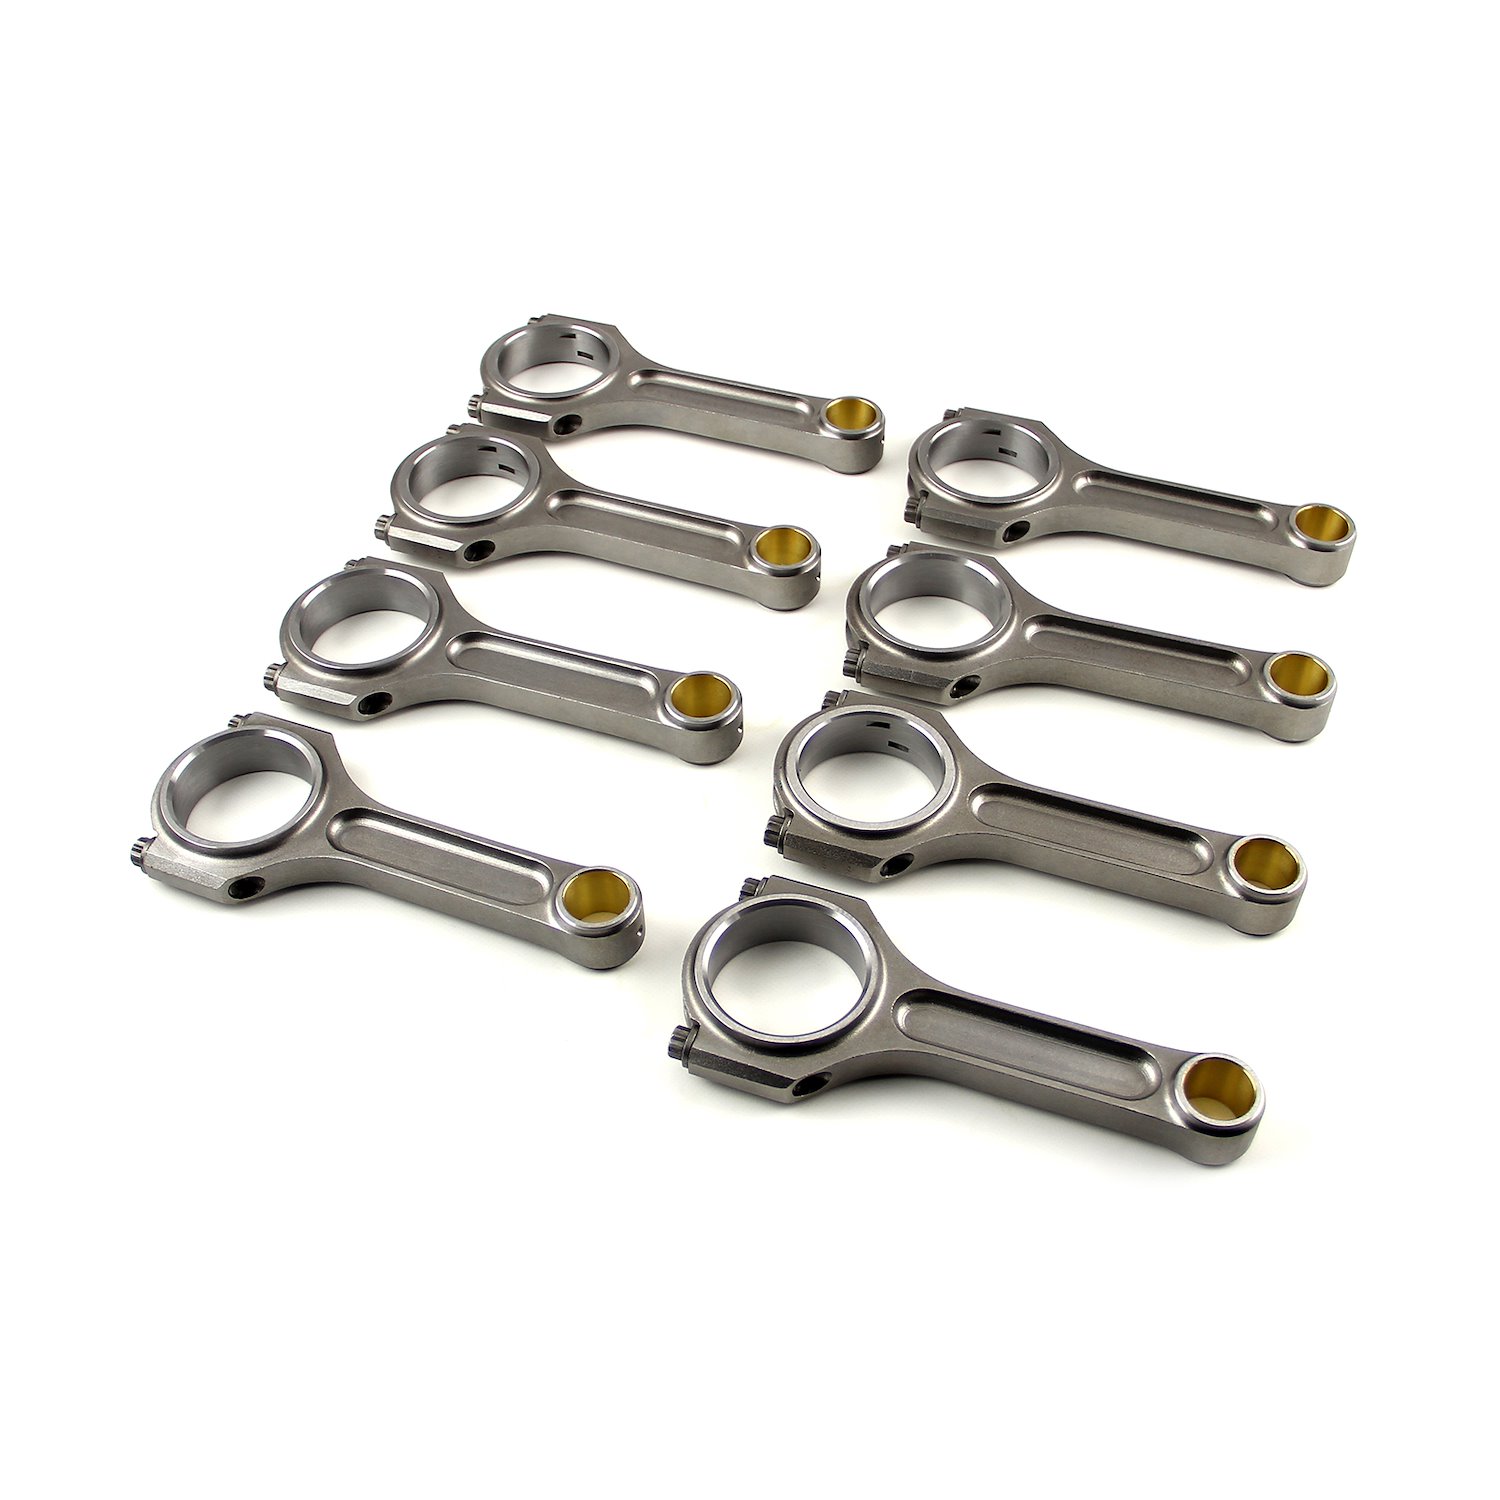 I Beam Race 5.090 2.123 .912 Bronze Bush 4340 Connecting Rods - Ford 302